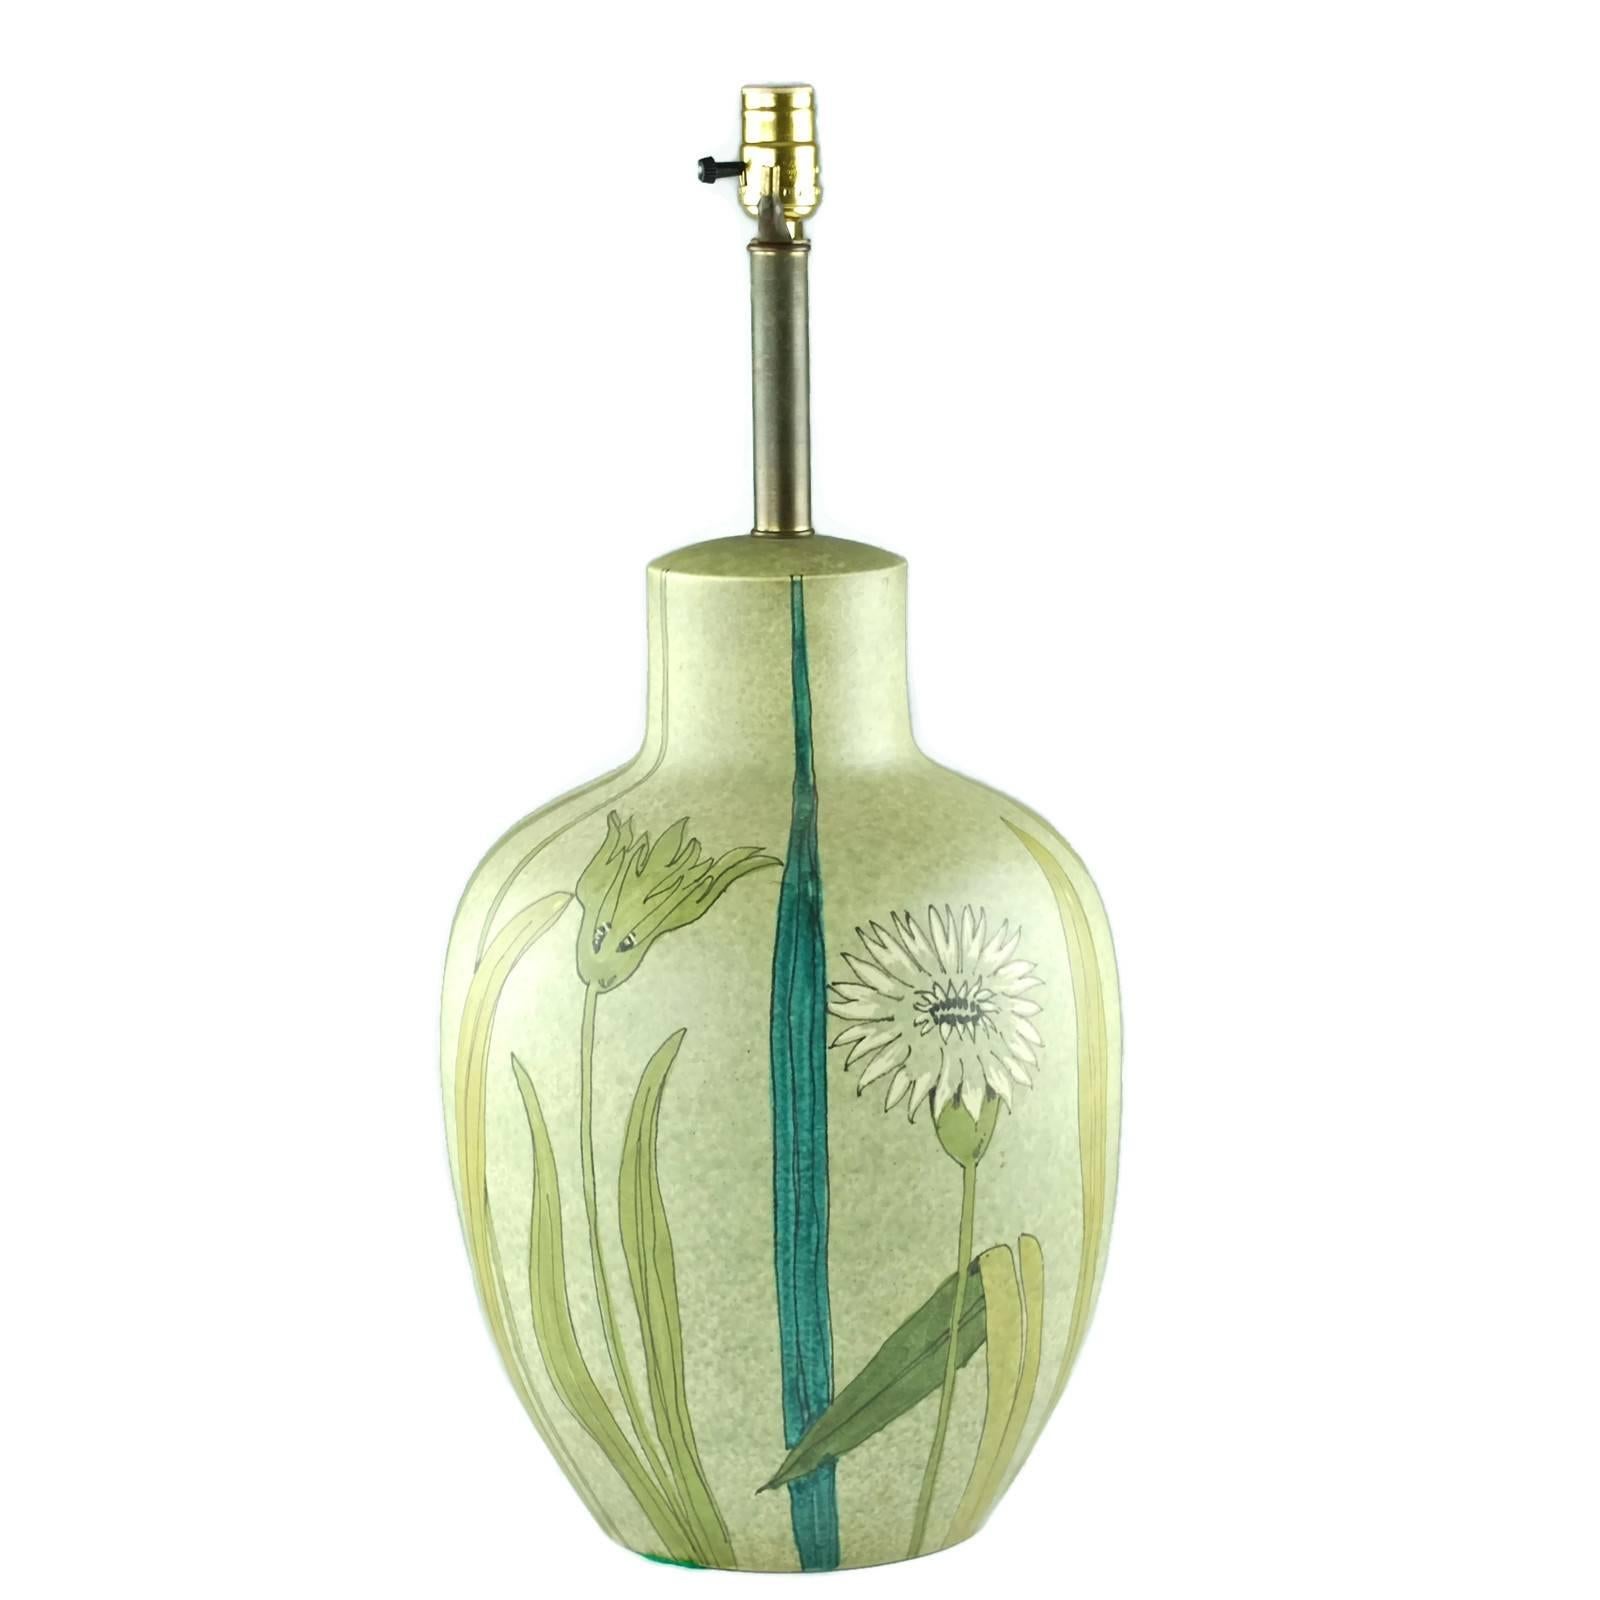 This large Italian ceramic table lamp was designed by Alvino Bagni for importer and distributor Raymor, whose tagline was 